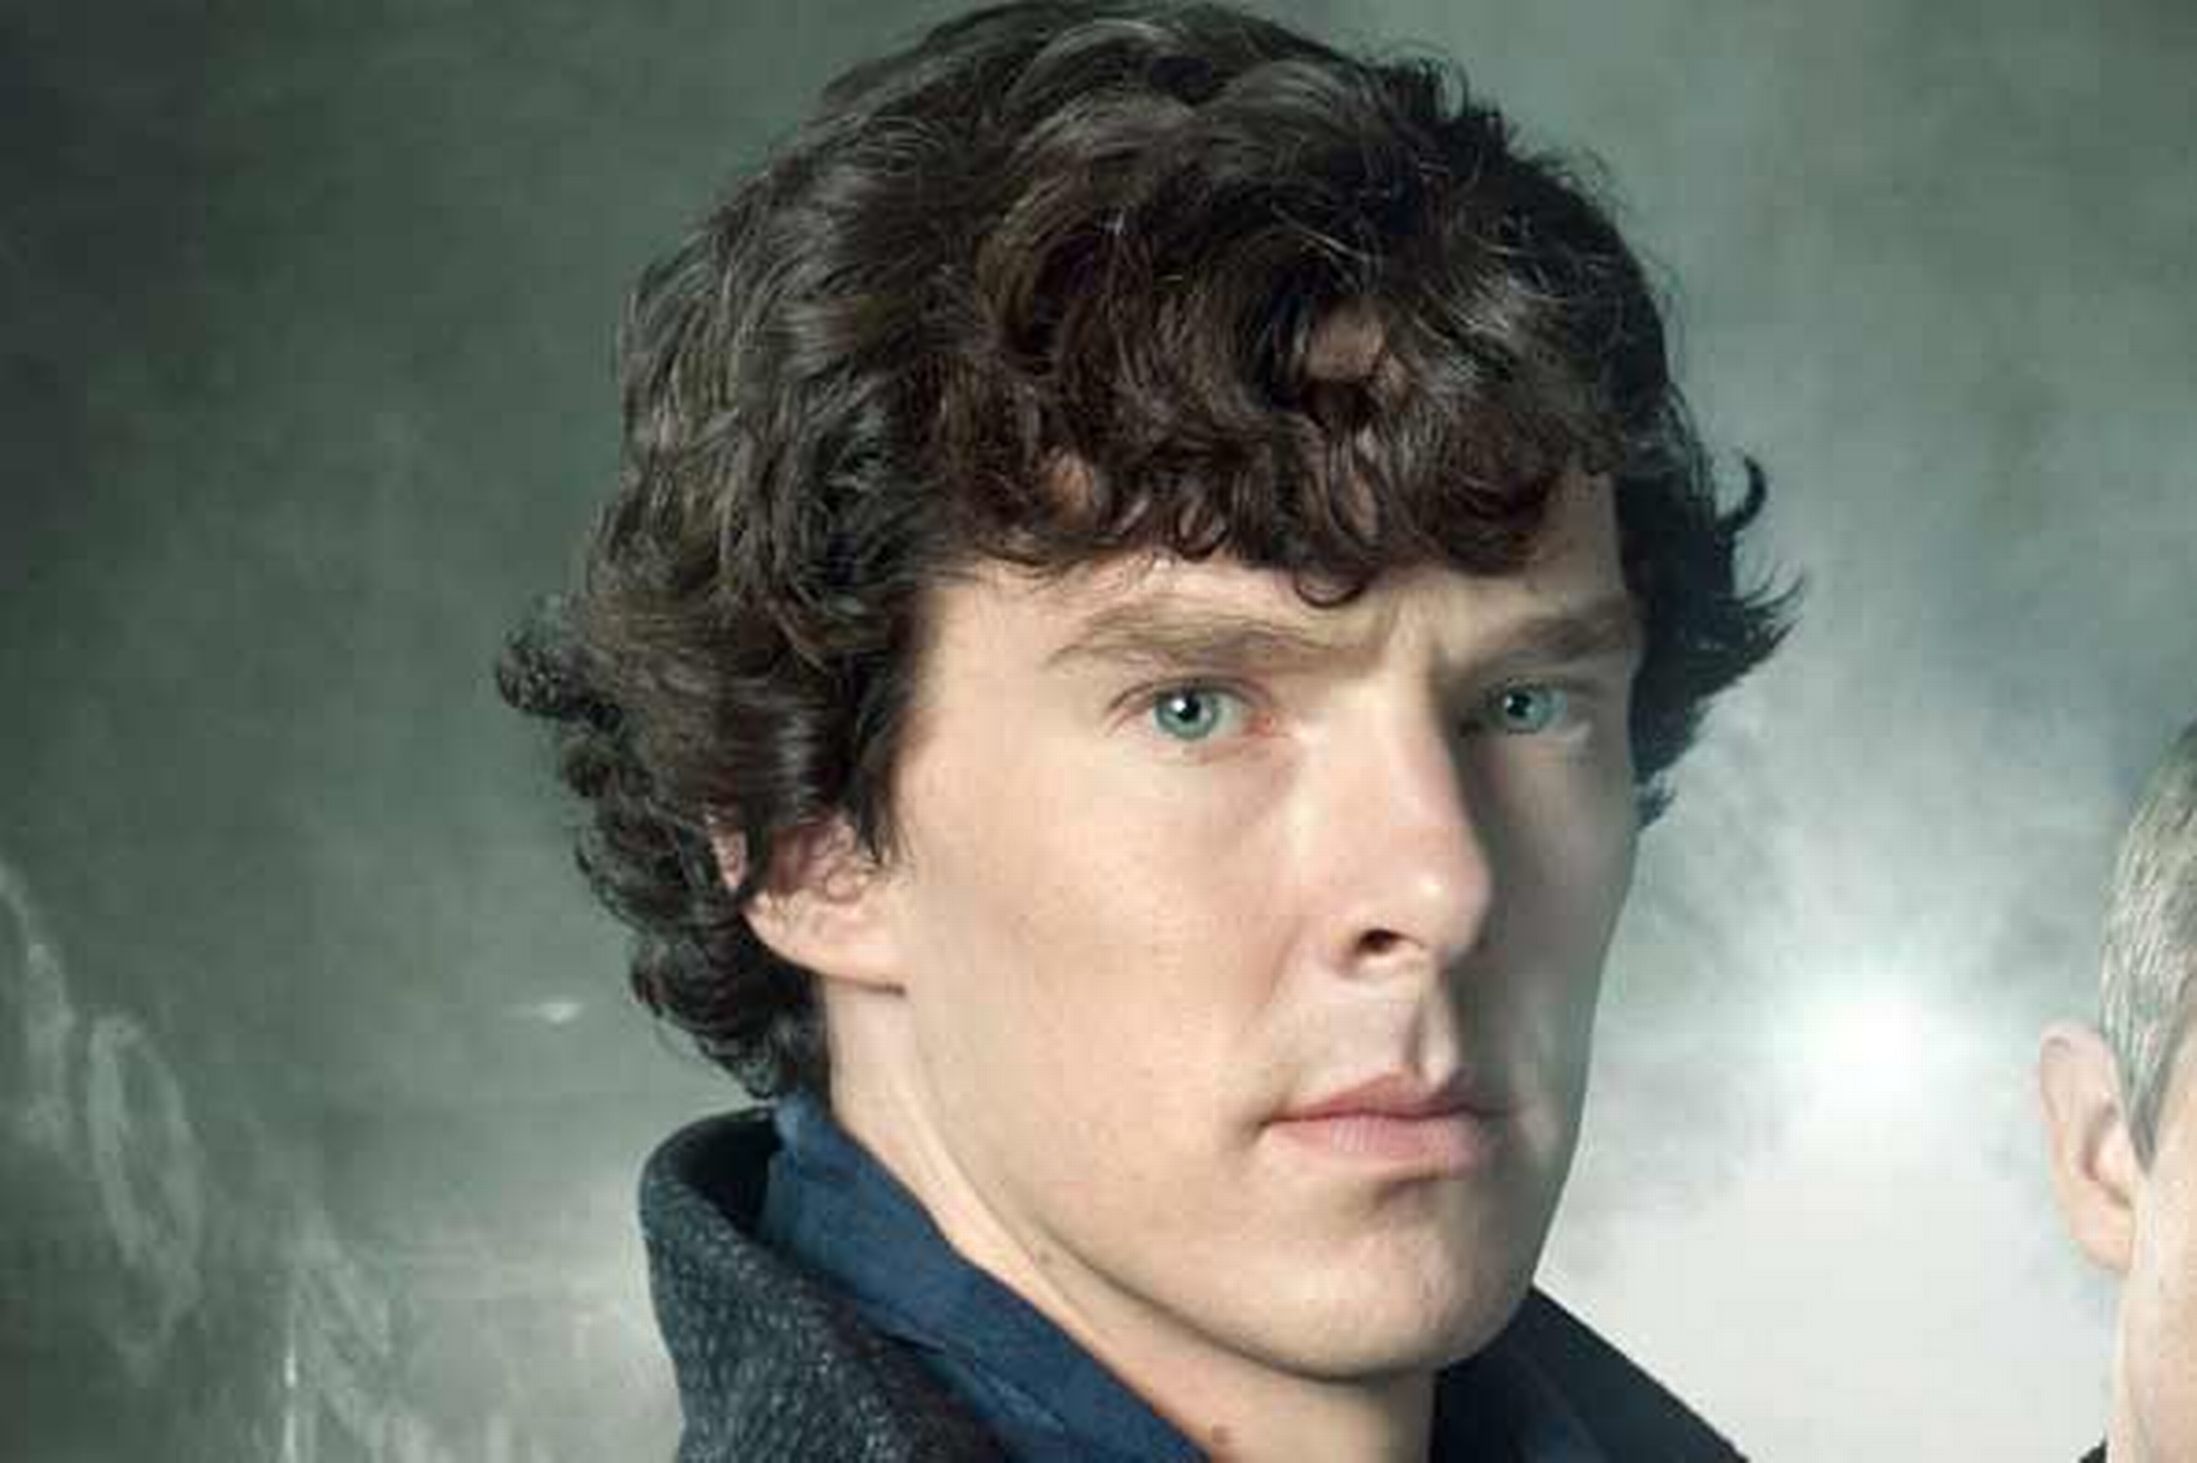 Geek insider, geekinsider, geekinsider. Com,, best portrayals of sherlock holmes on television, entertainment